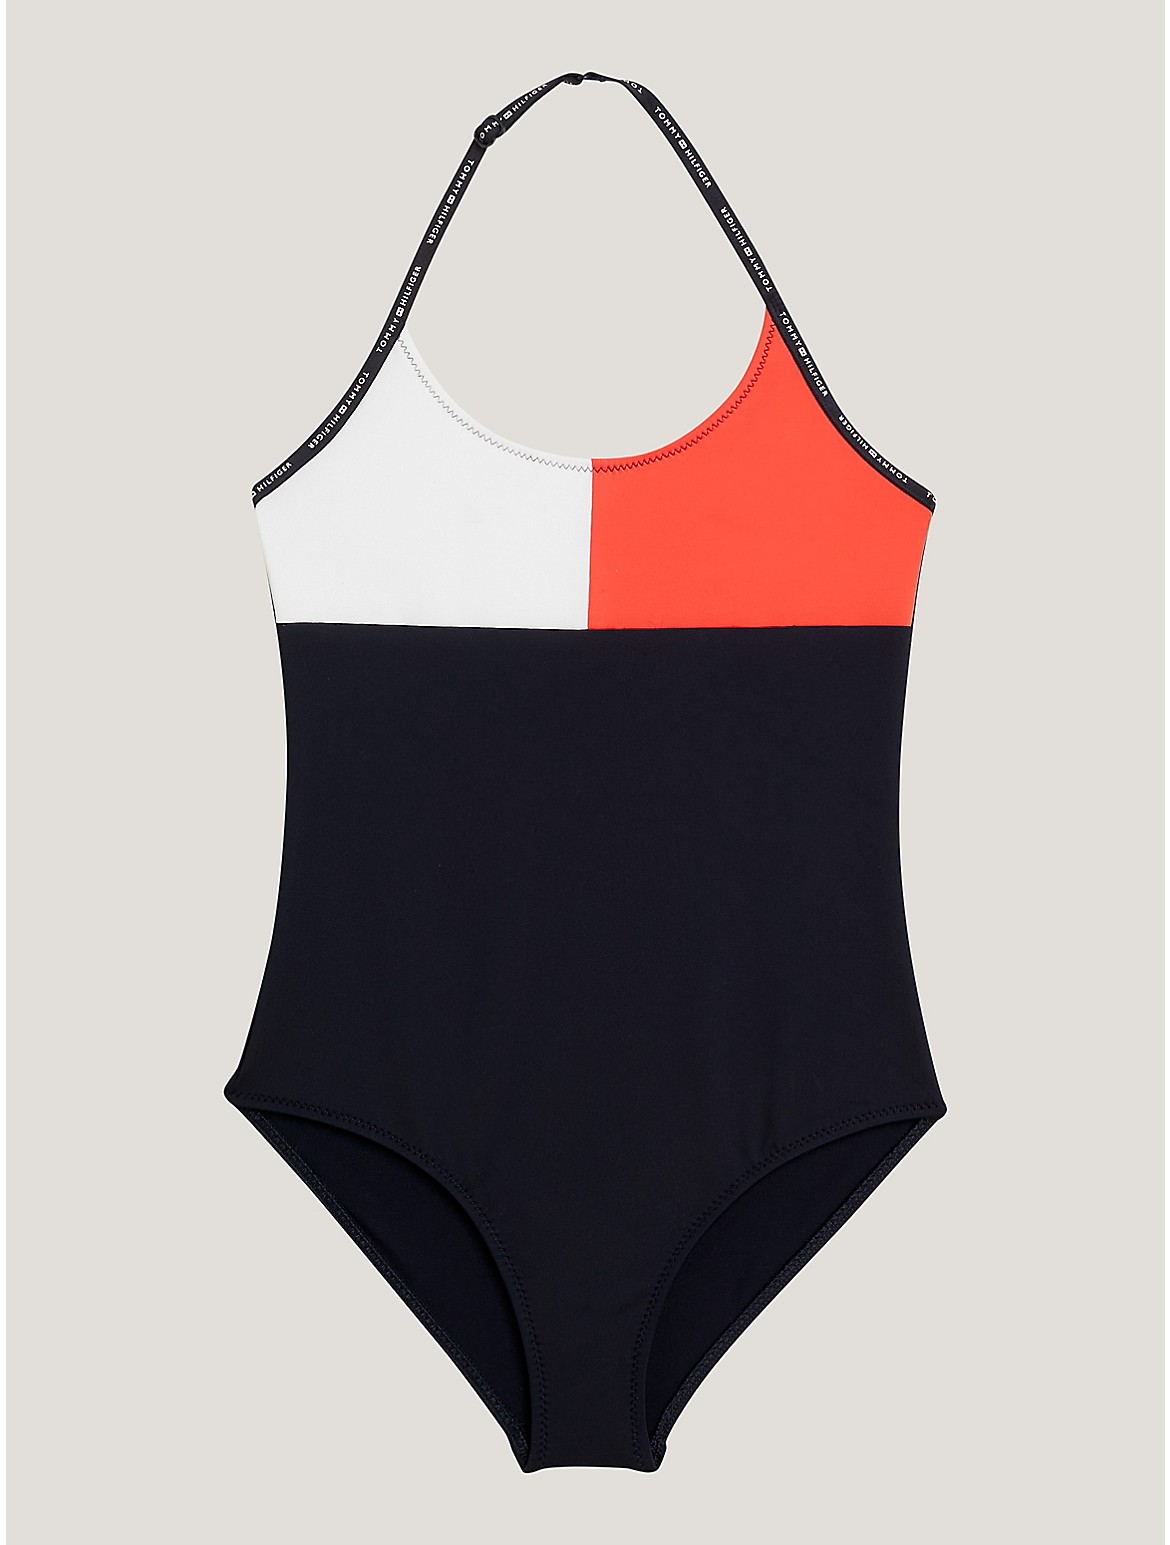 Tommy Hilfiger Girls' Kids' Colorblock One-Piece Swimsuit